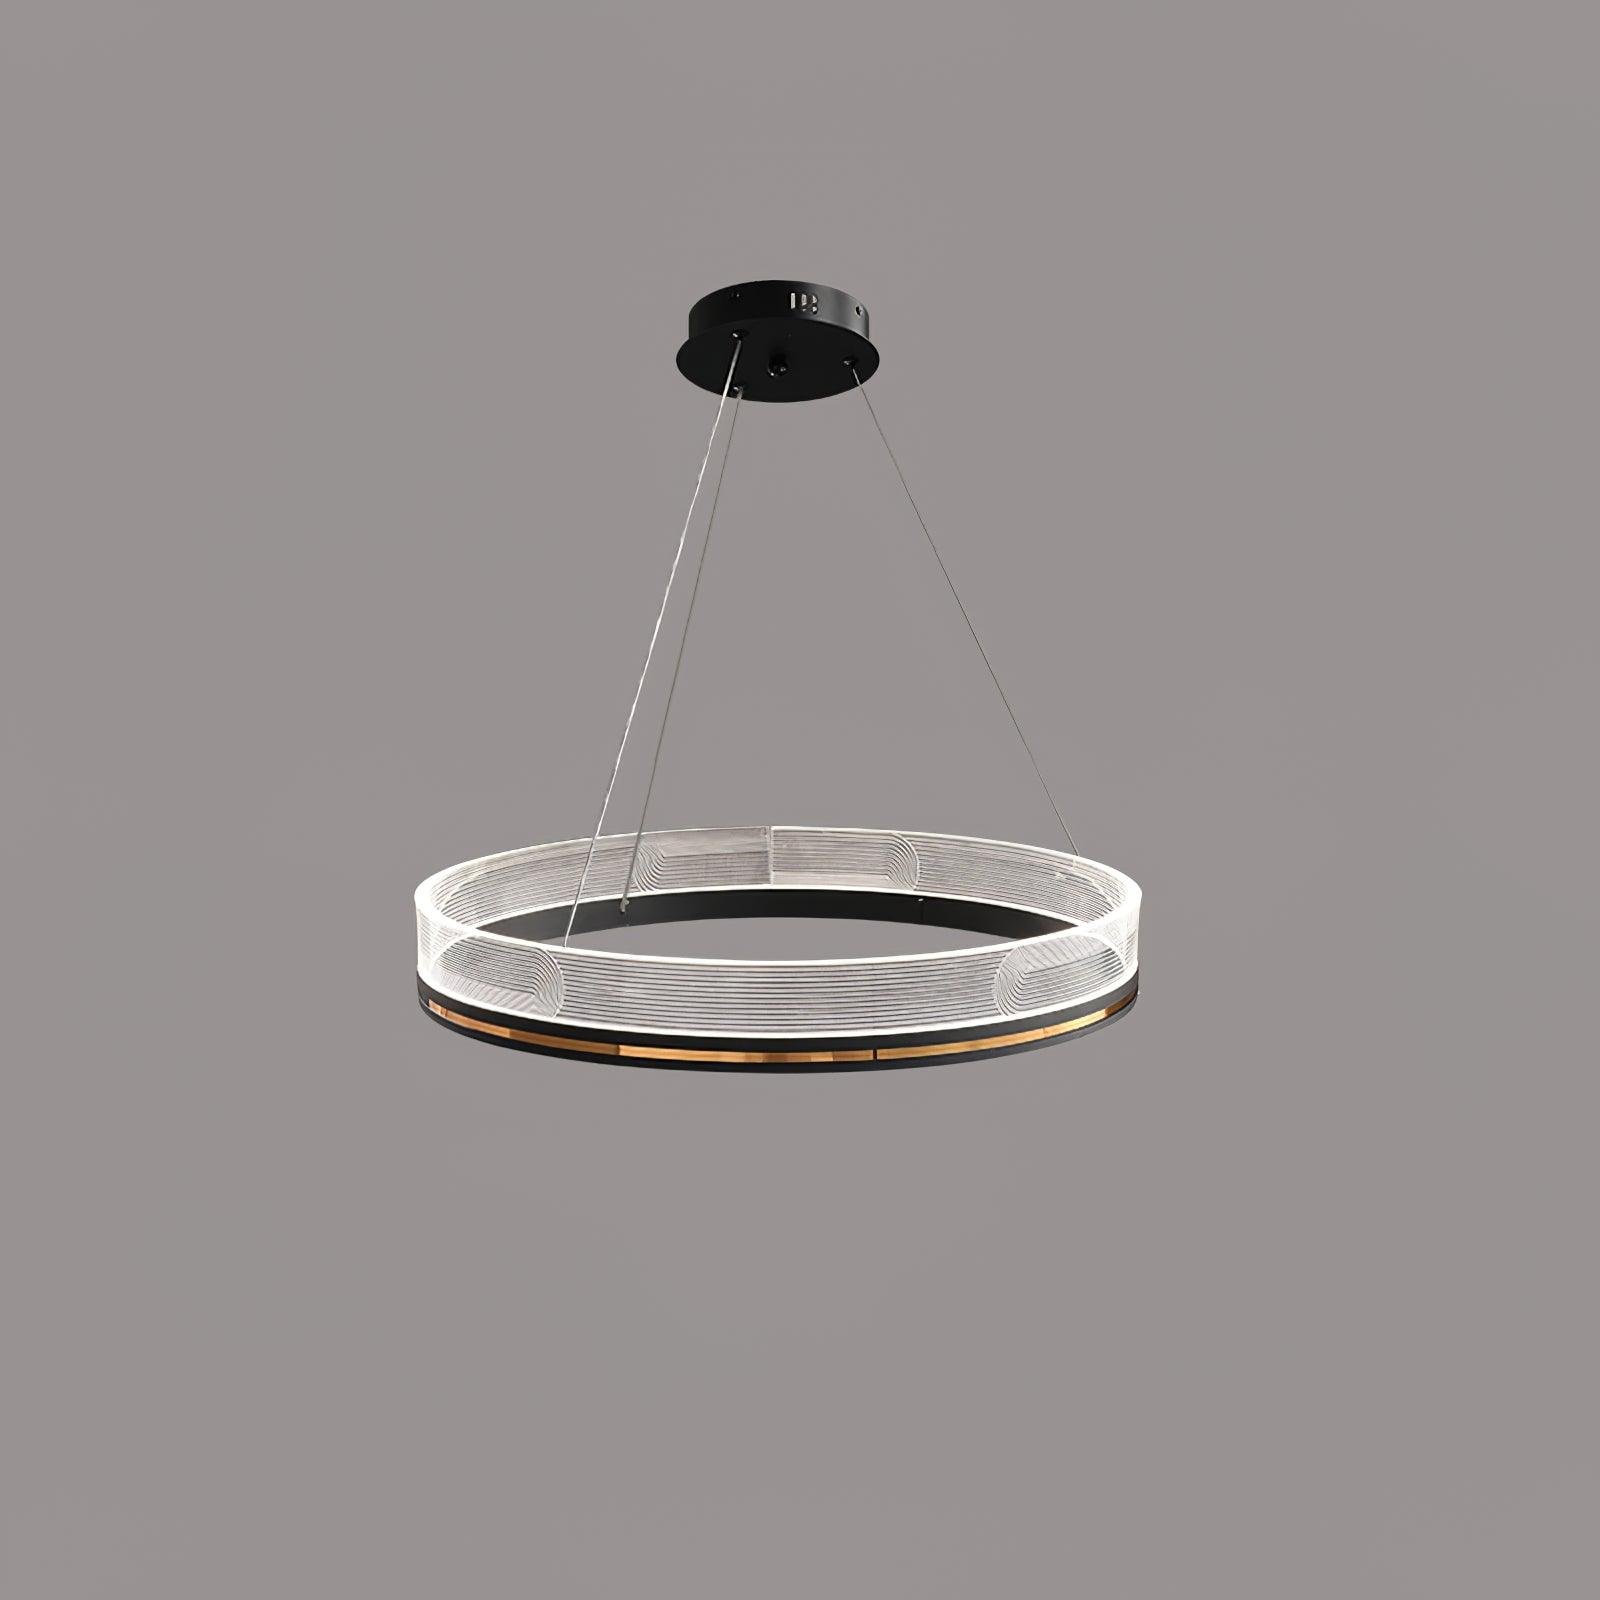 Black Cool White Sendra Chandelier, with a diameter of 23.6 inches and a height of 27.5 inches (or 60cm x 70cm)